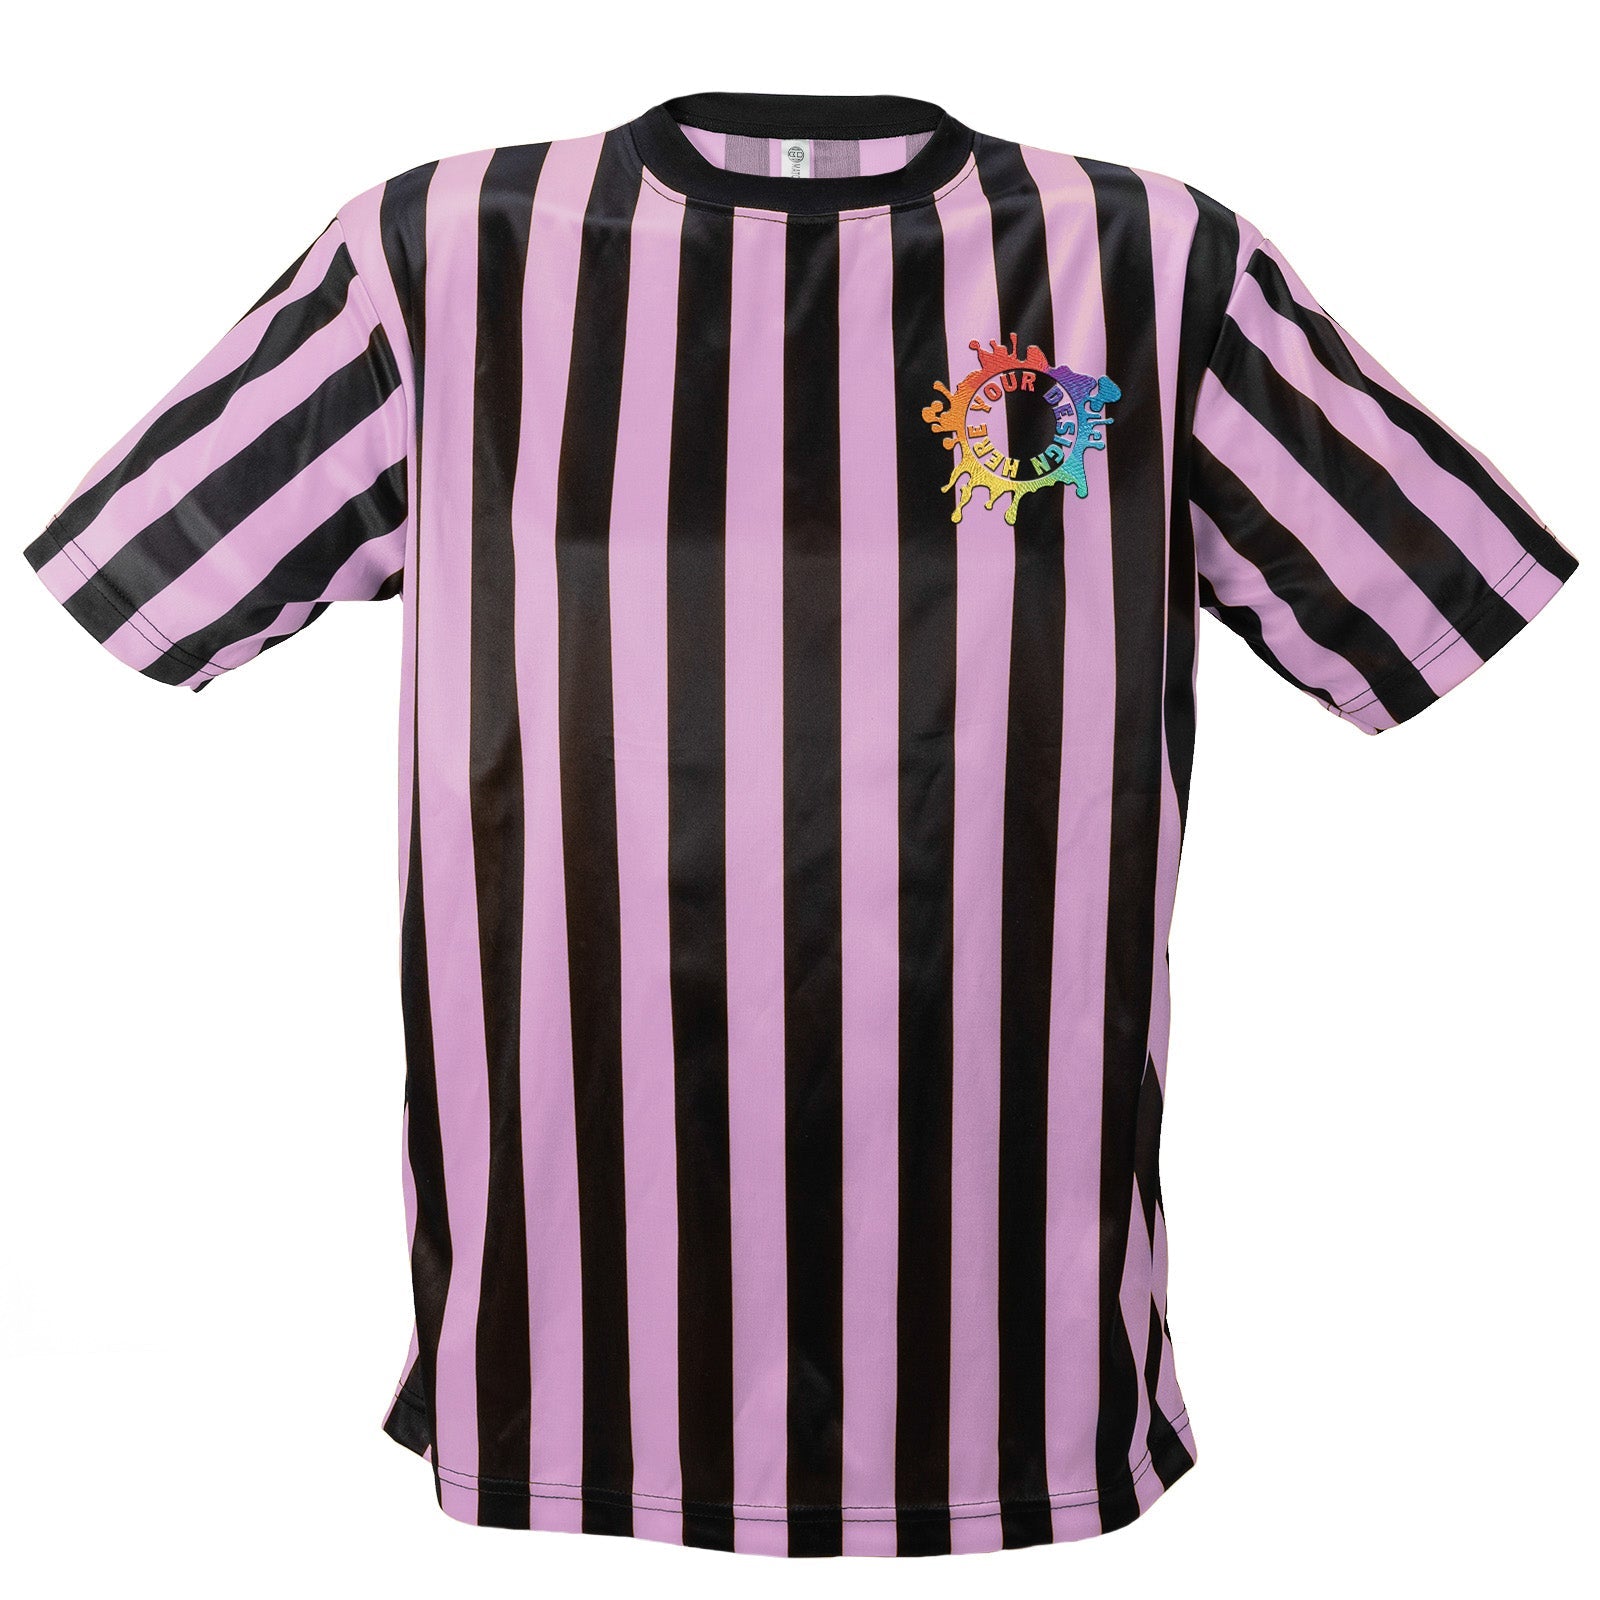 Mato & Hash Men's Crew Neck Referee Shirts for Officials and Staff W/ Embroidery - Mato & Hash